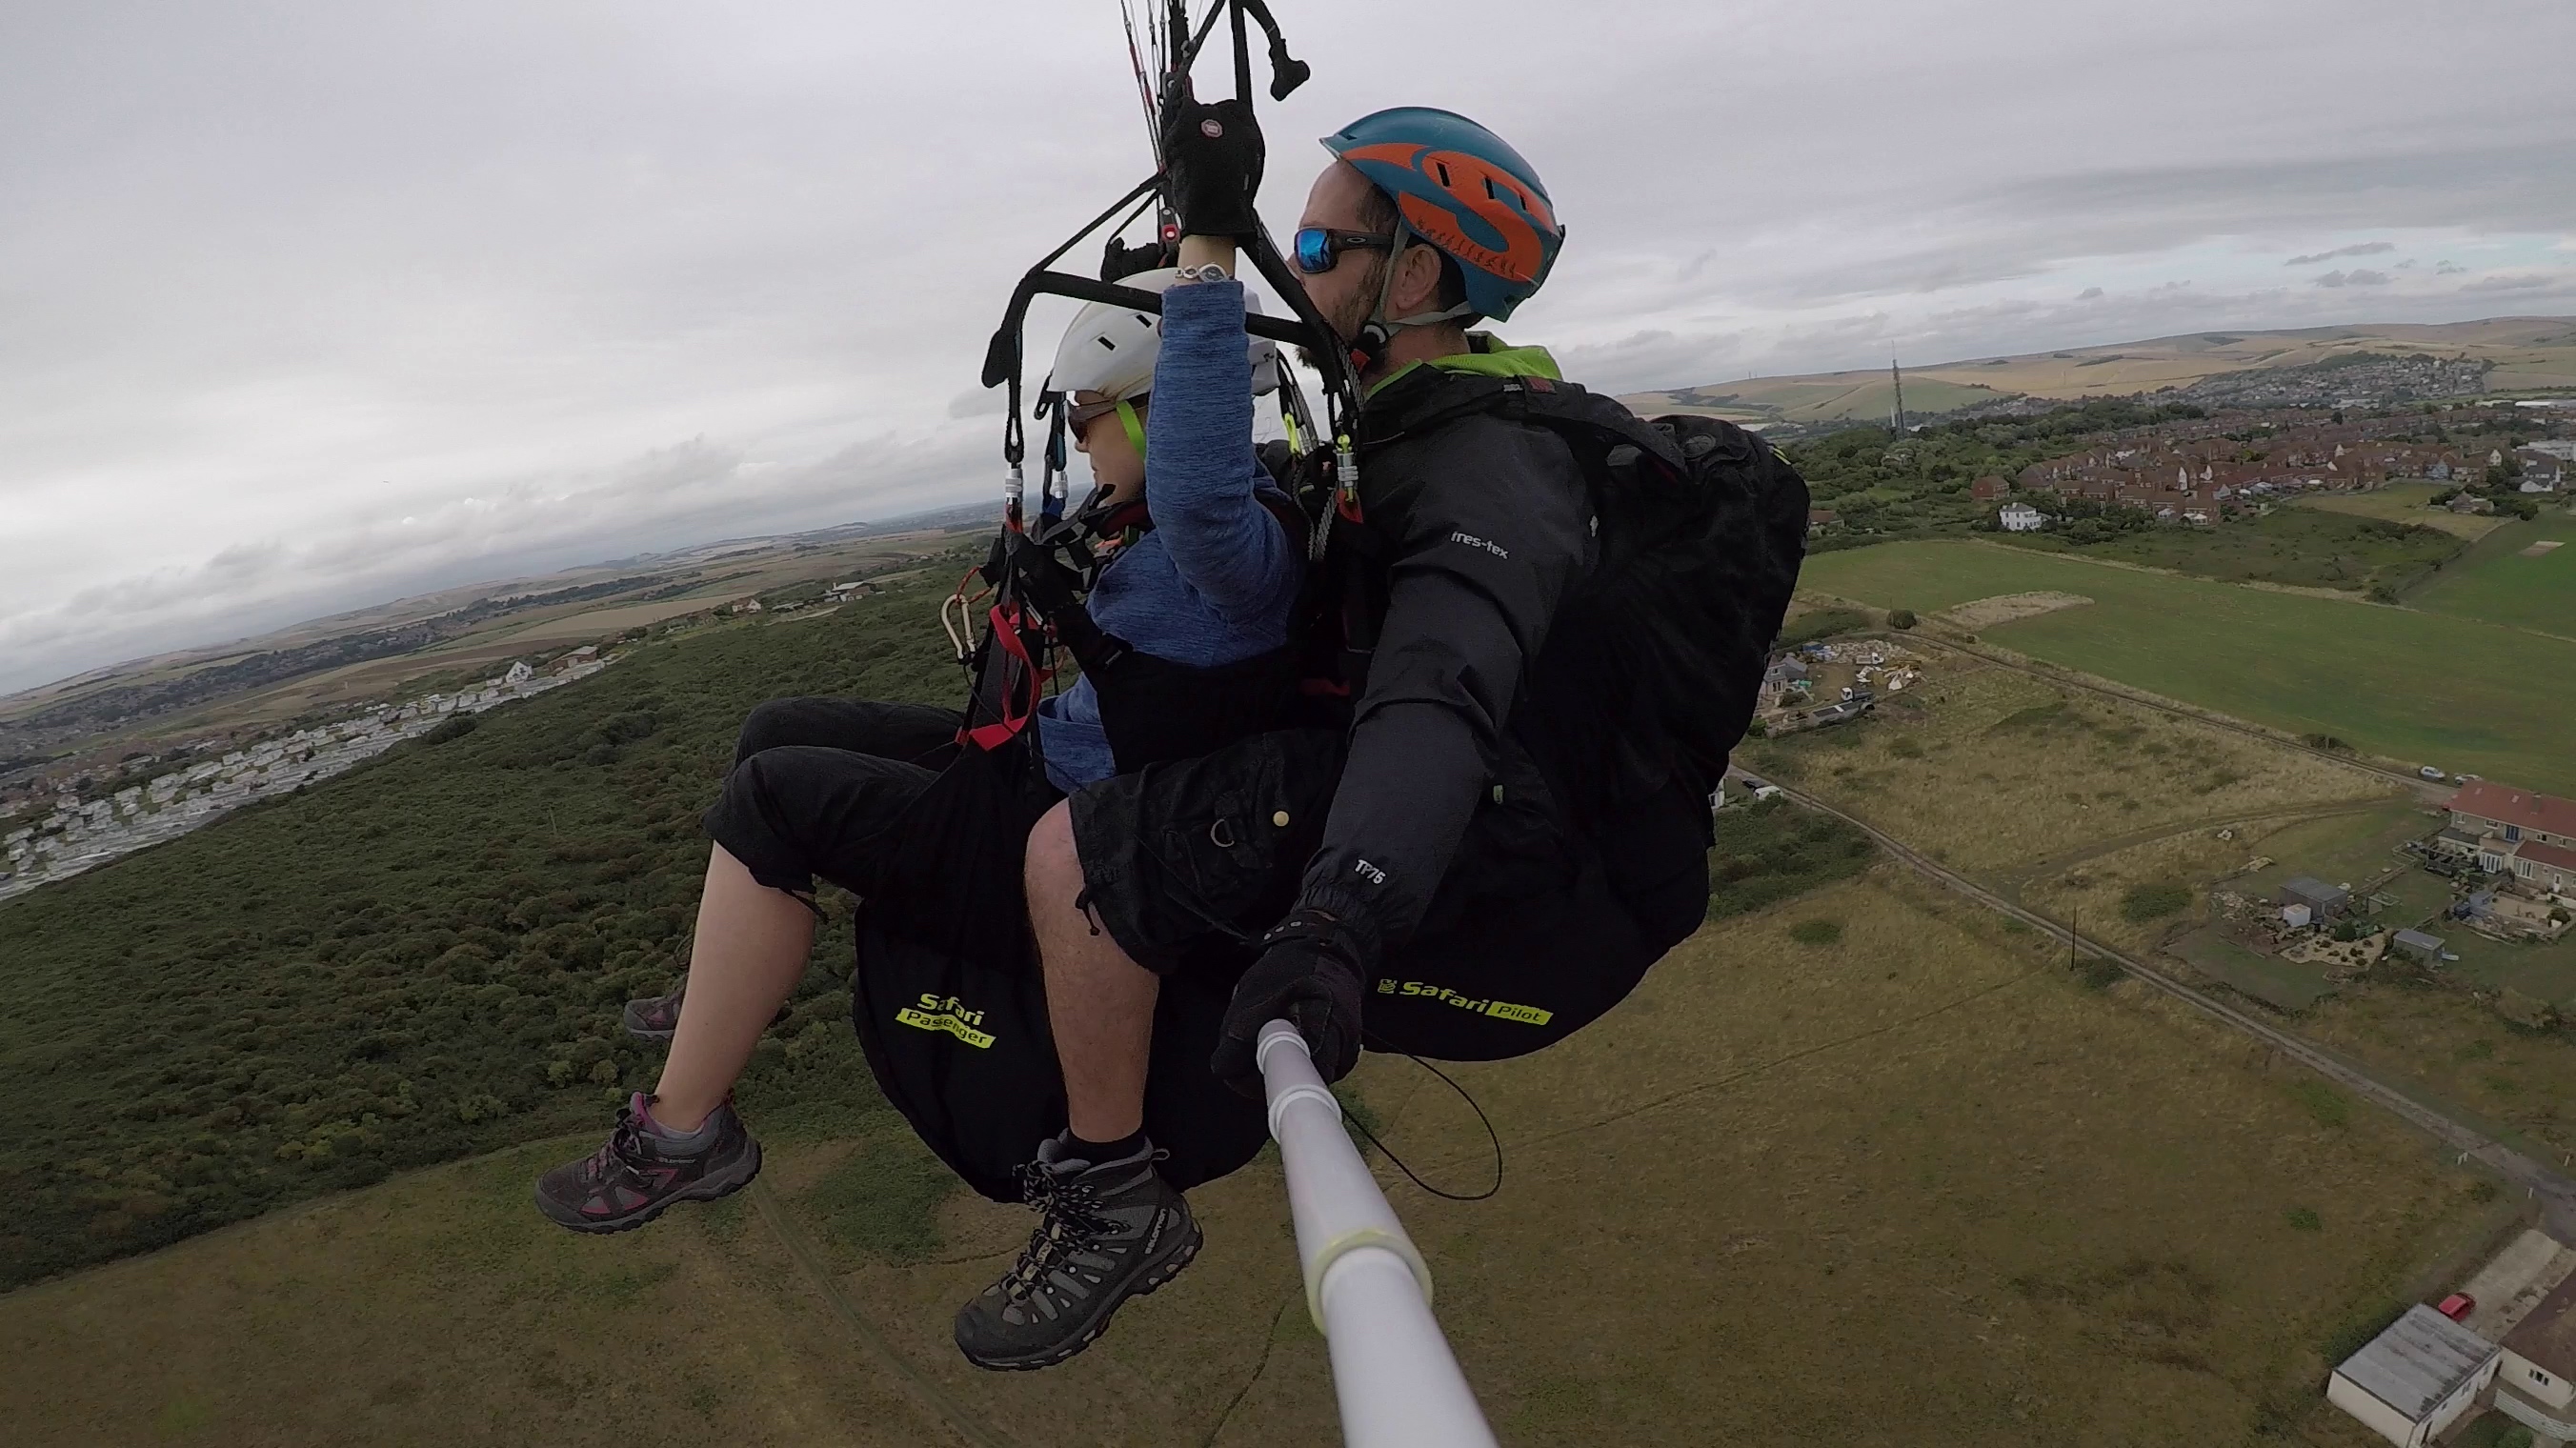 Gift ideas in Sussex with Mile High Paragliding